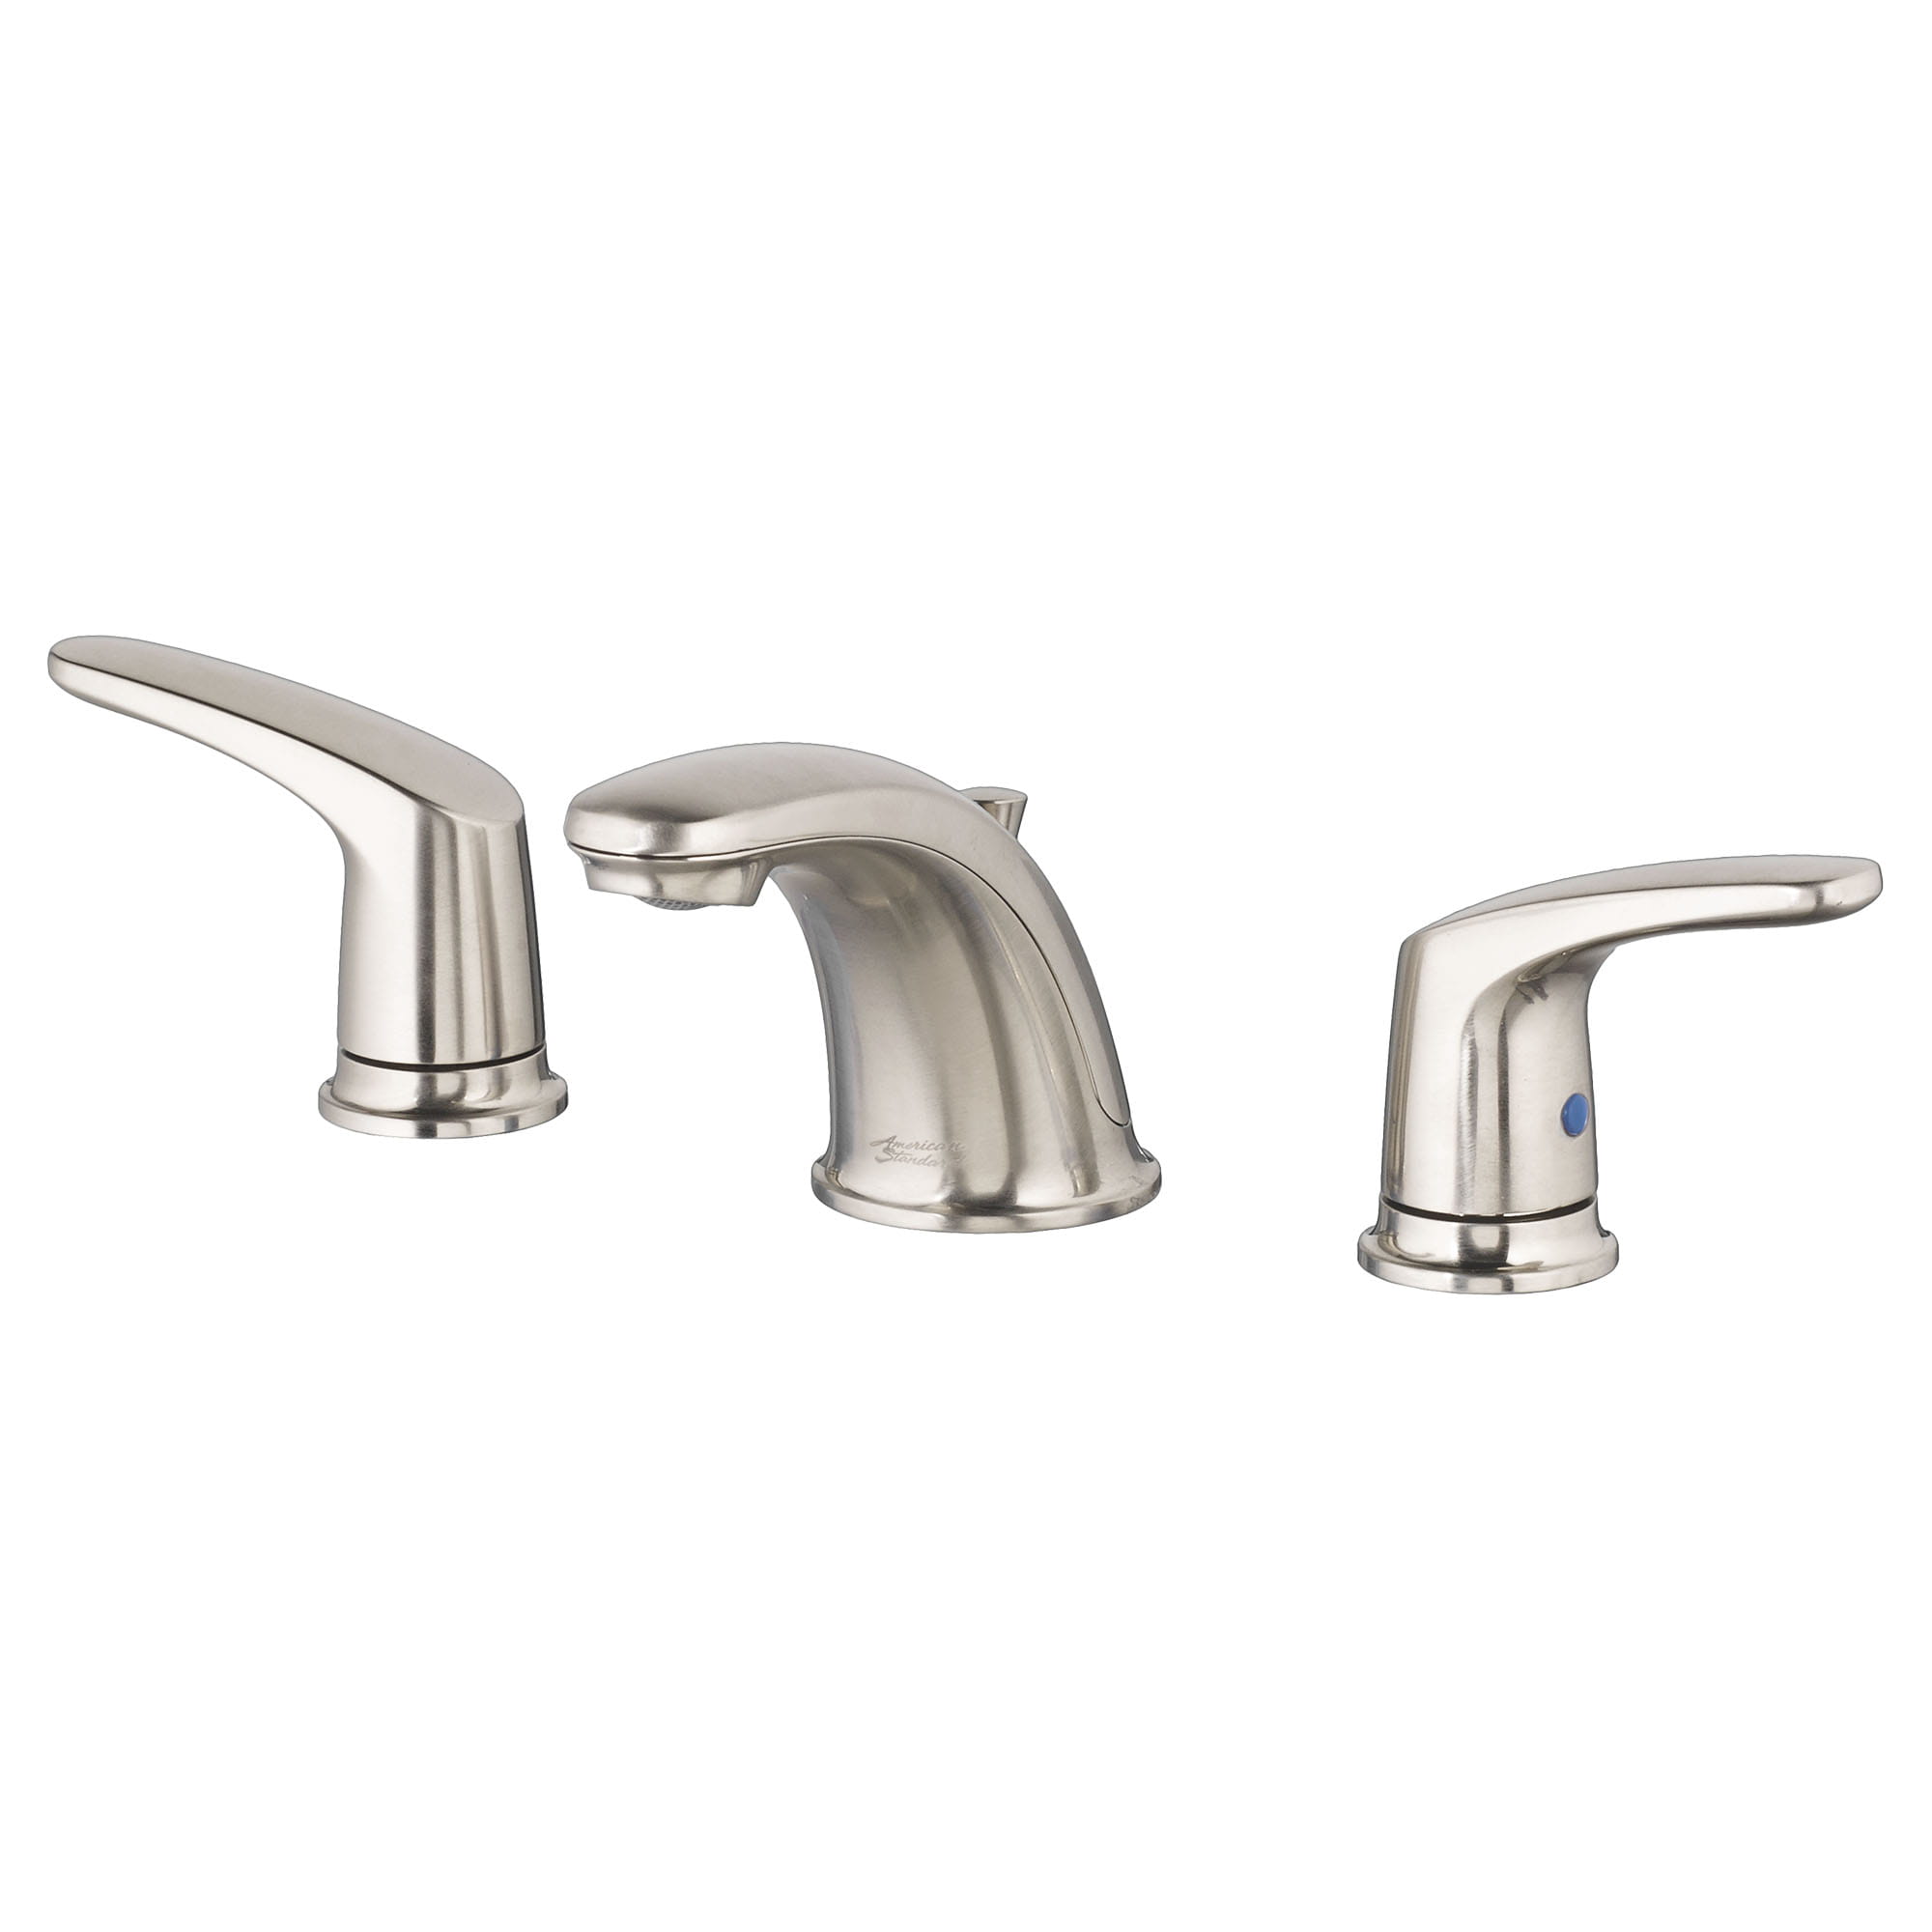 Colony PRO 8 Inch Widespread 2 Handle Bathroom Faucet 12 gpm 45 L min With Lever Handles   BRUSHED NICKEL